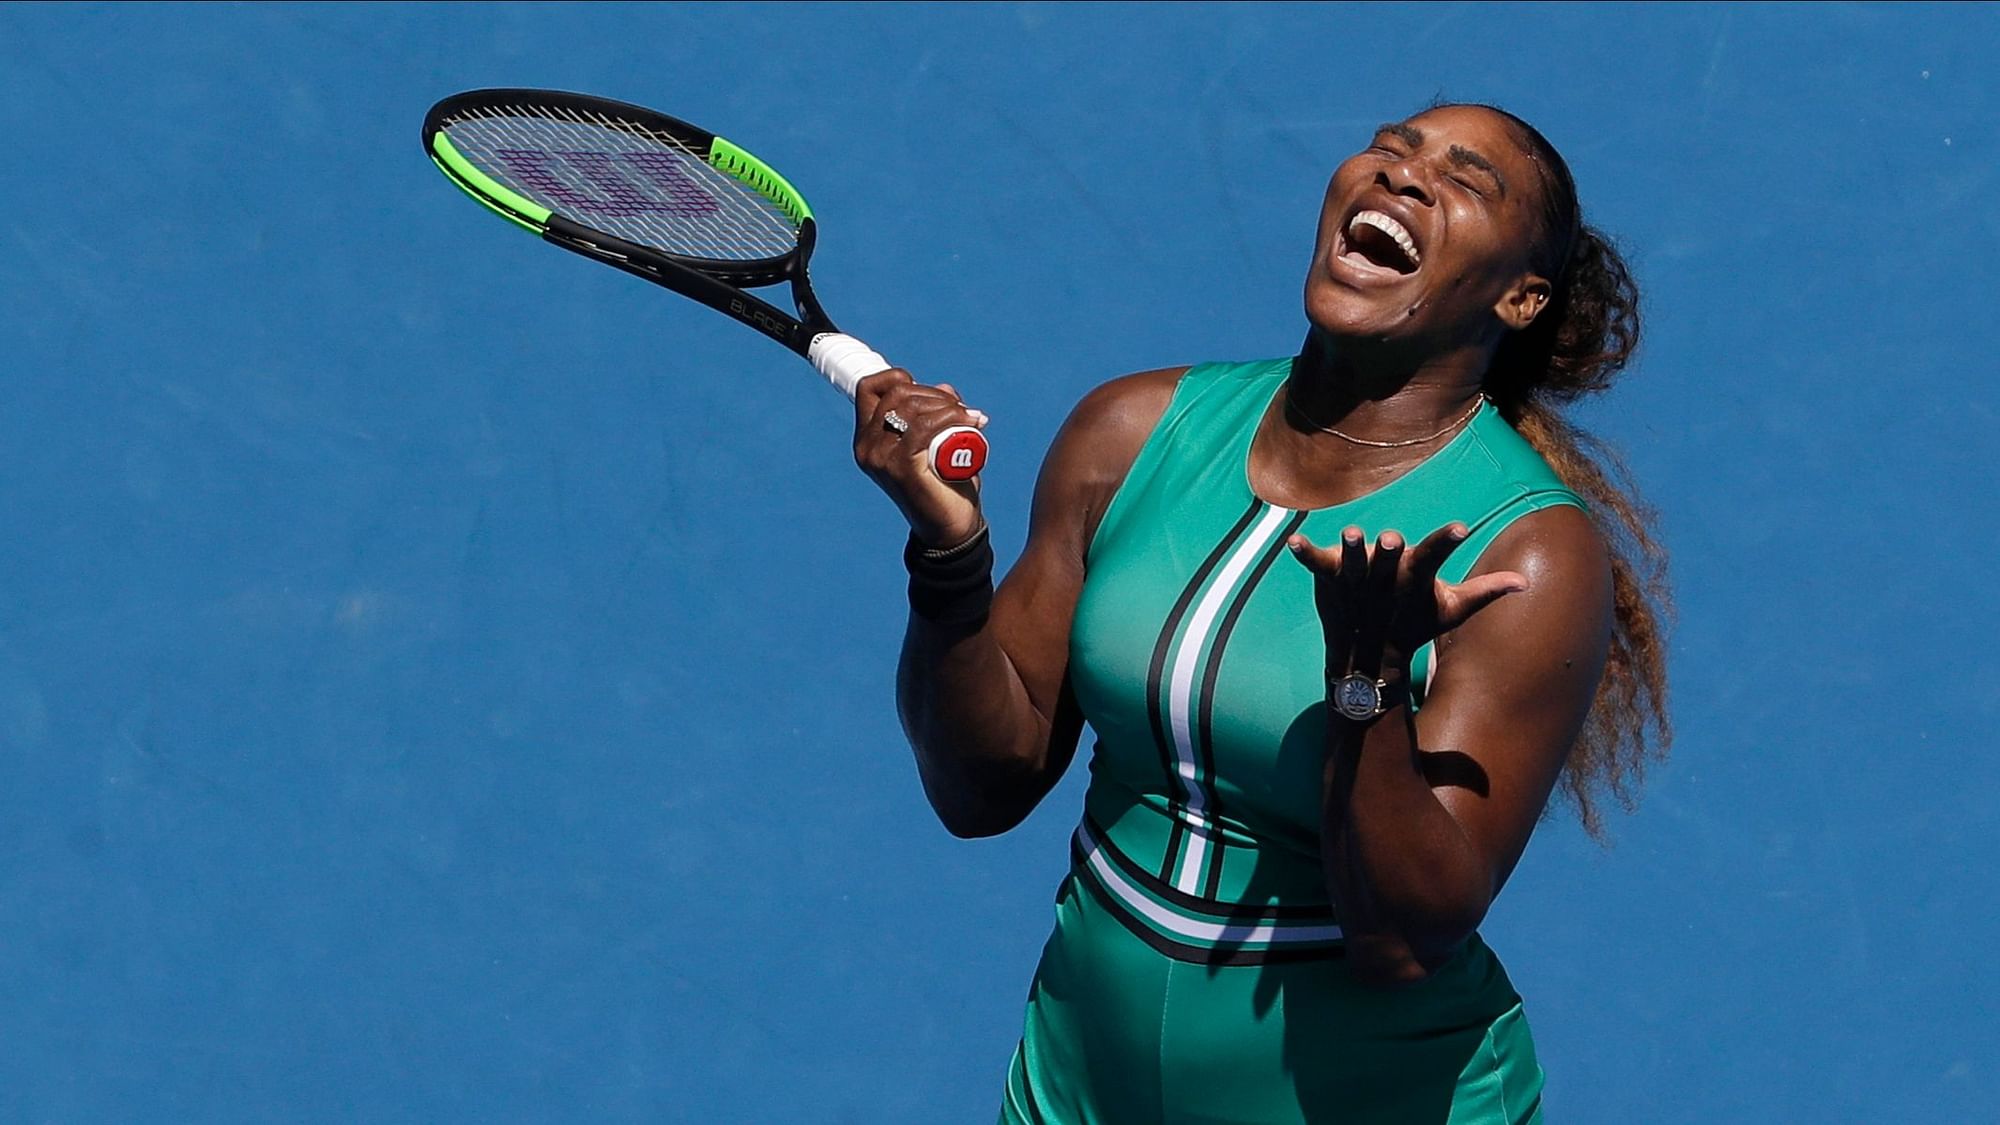 Serena Williams was knocked out in the quarter-finals of the Australian Open following a suspect foot fault call on match point.